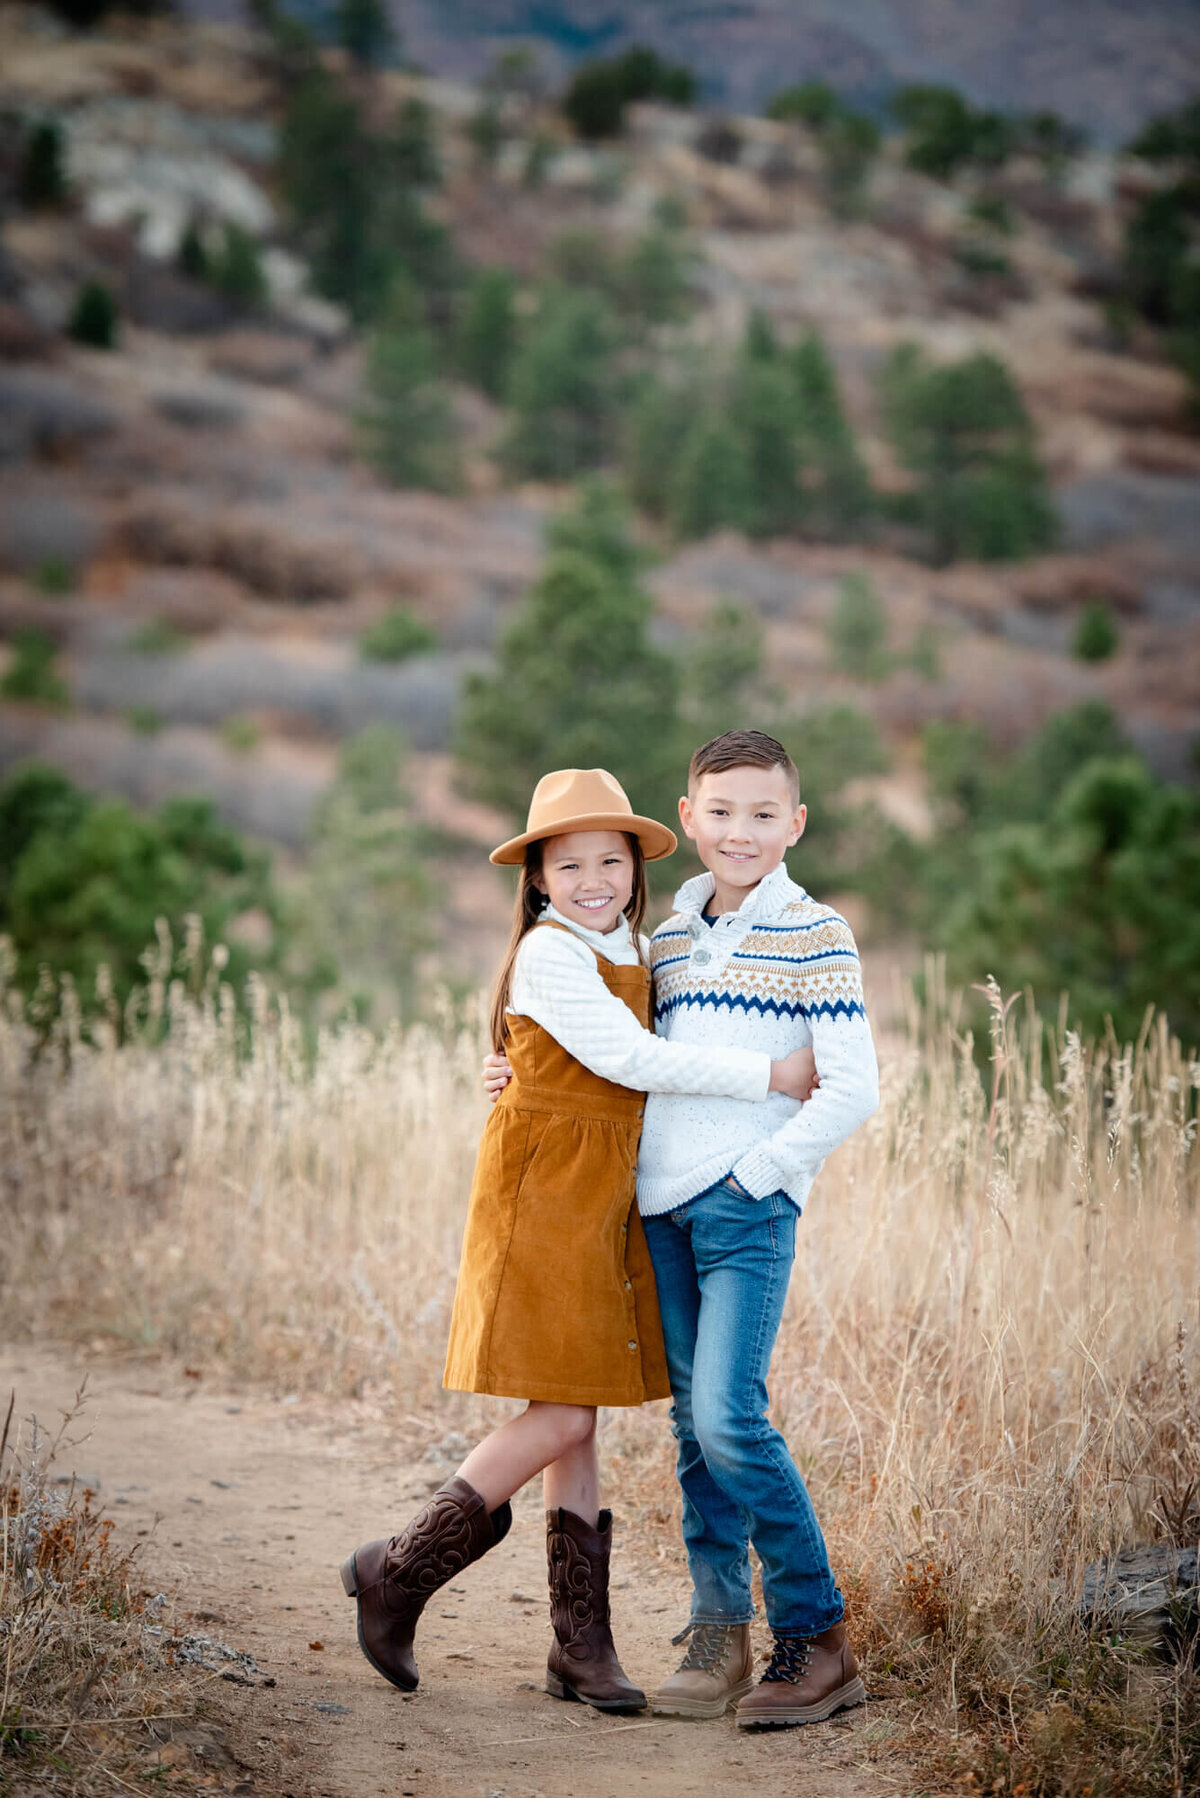 A young girl in an orange dress hugs her older brother while hiking on a trail